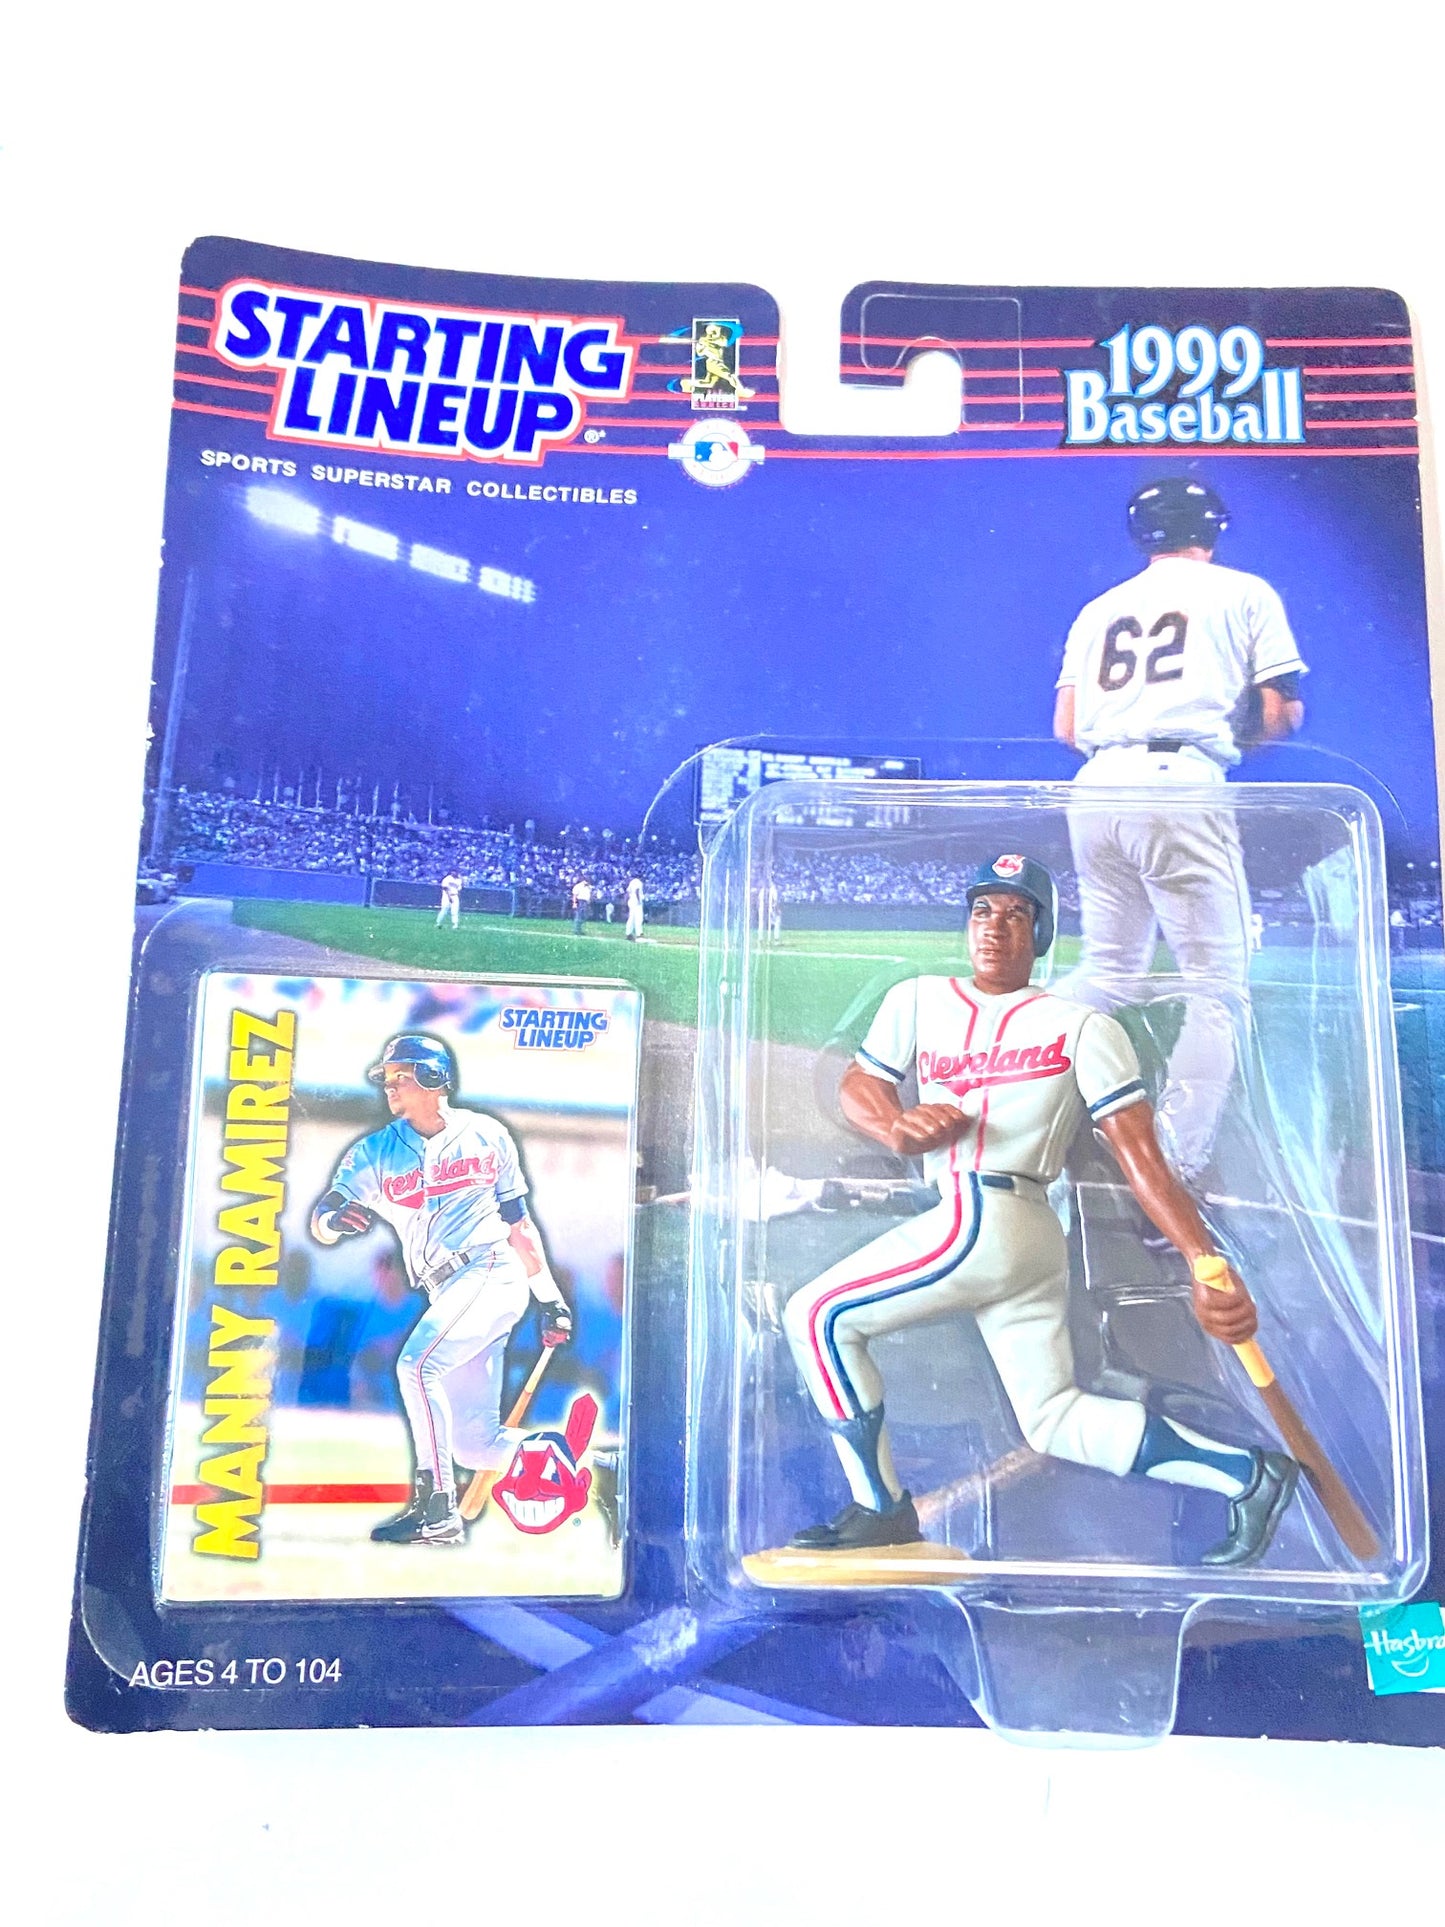 Manny Ramirez 1999 Cleveland Indians MLB Starting Lineup Figure (New) by Kenner